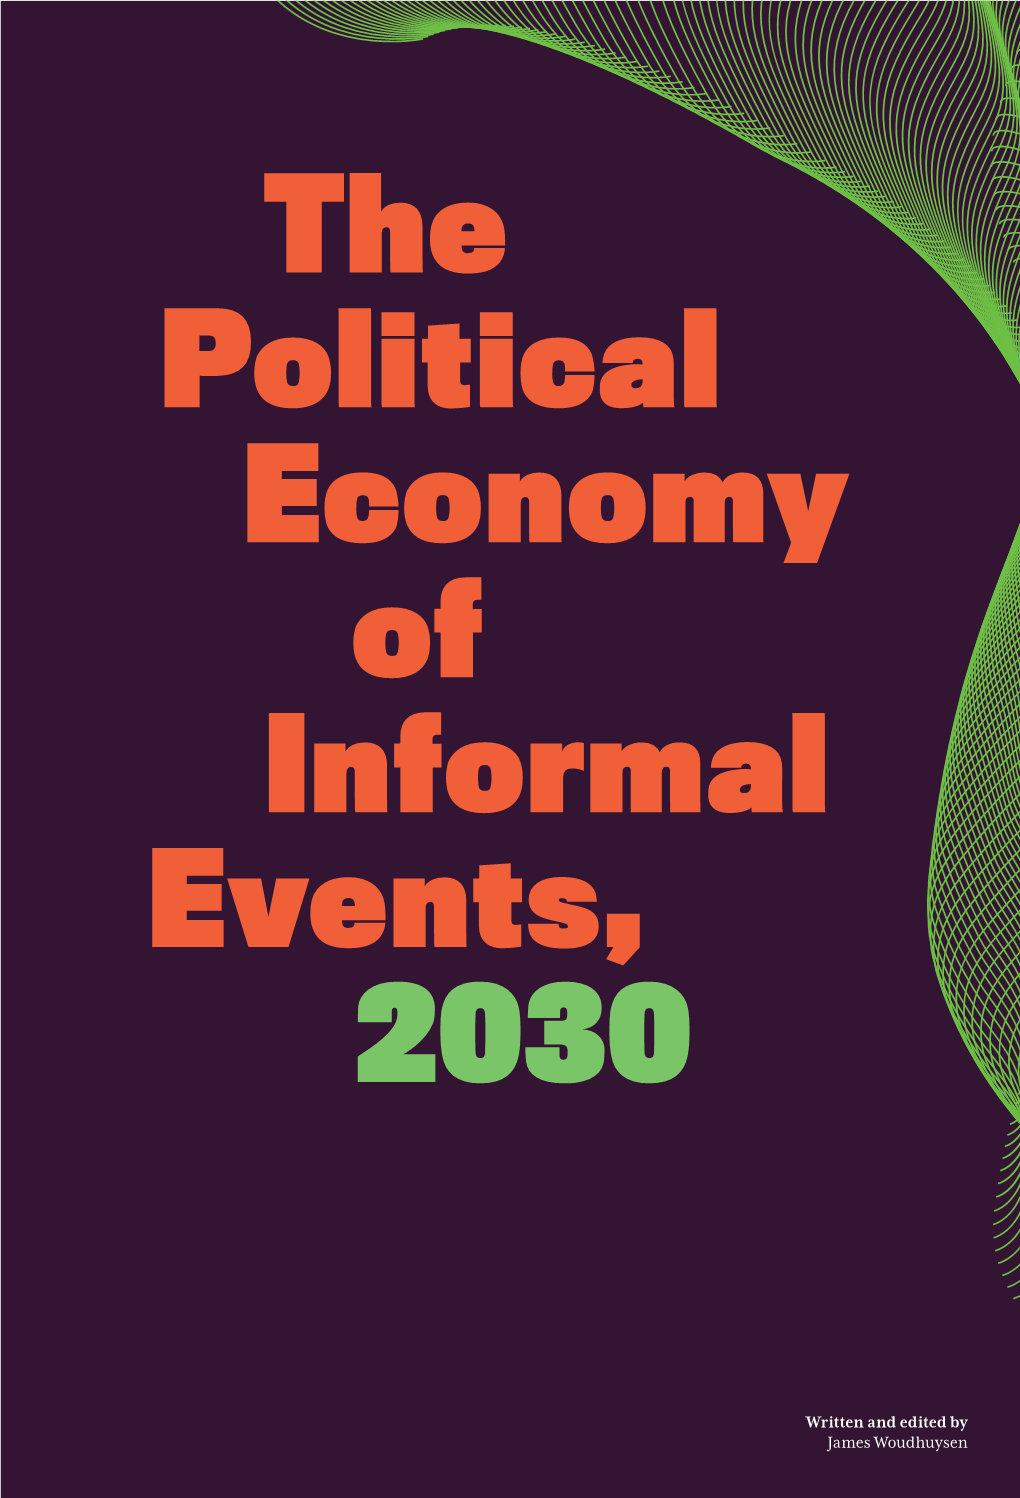 The Political Economy of Informal Events, 2030